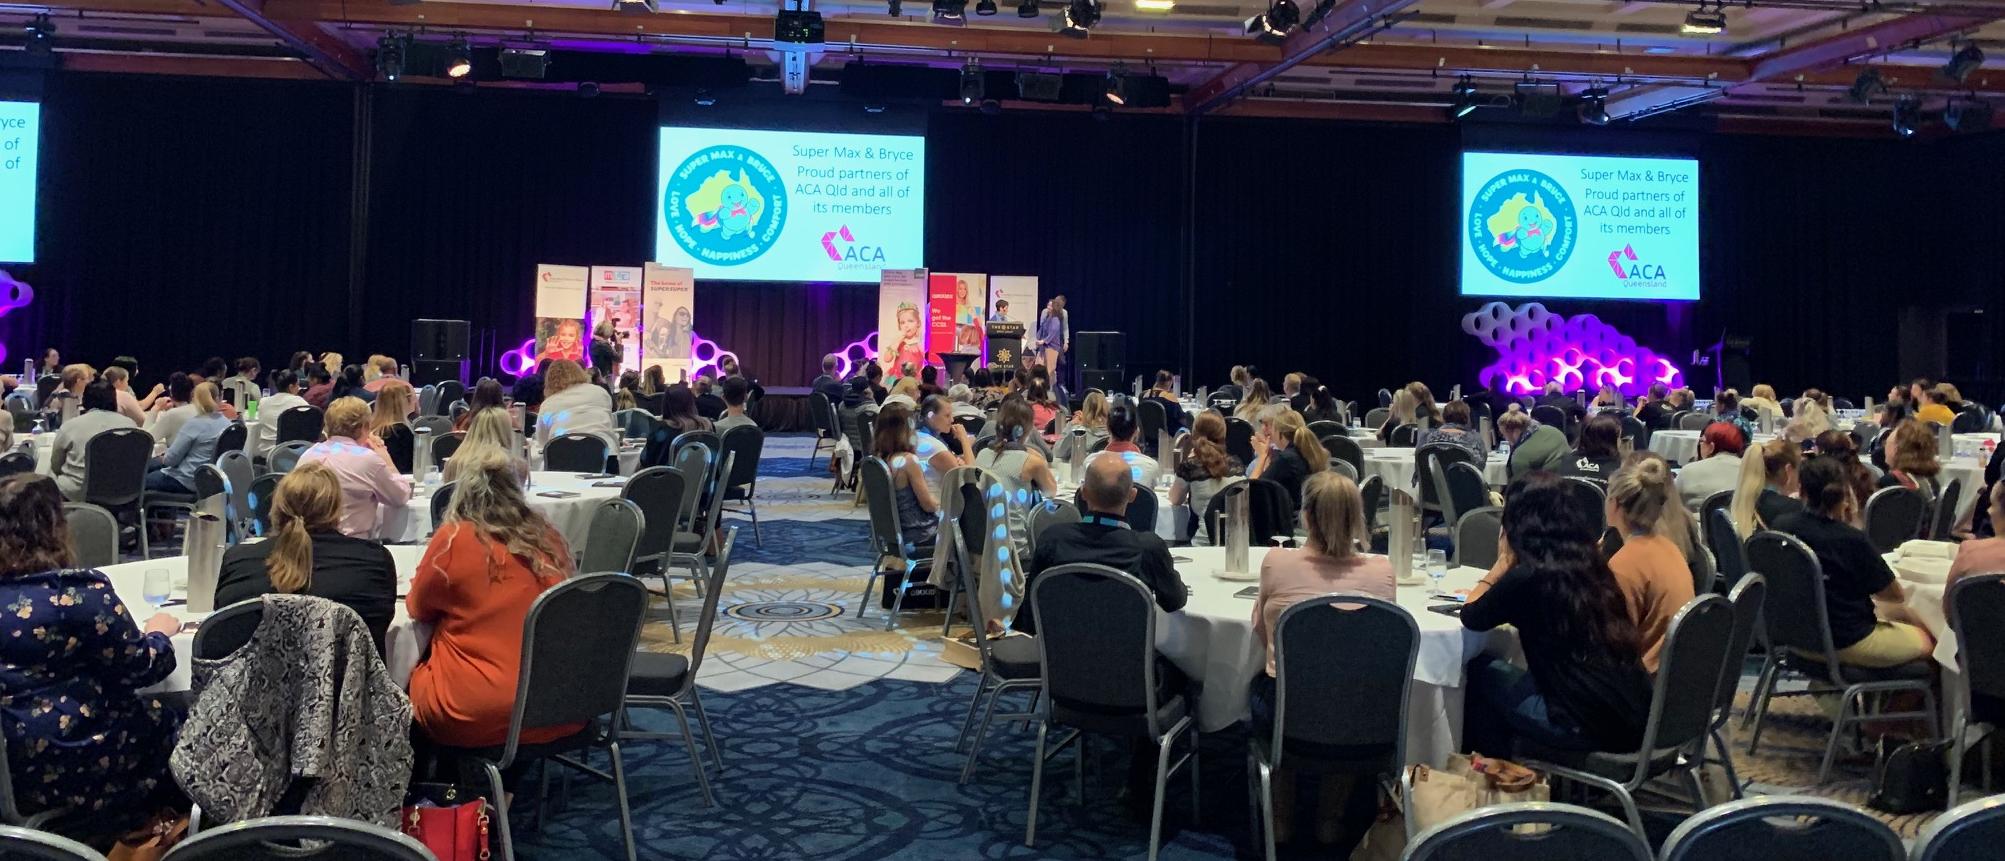 Over 16,000 raised at the 2019 ACA Qld Conference Super Max & Bryce